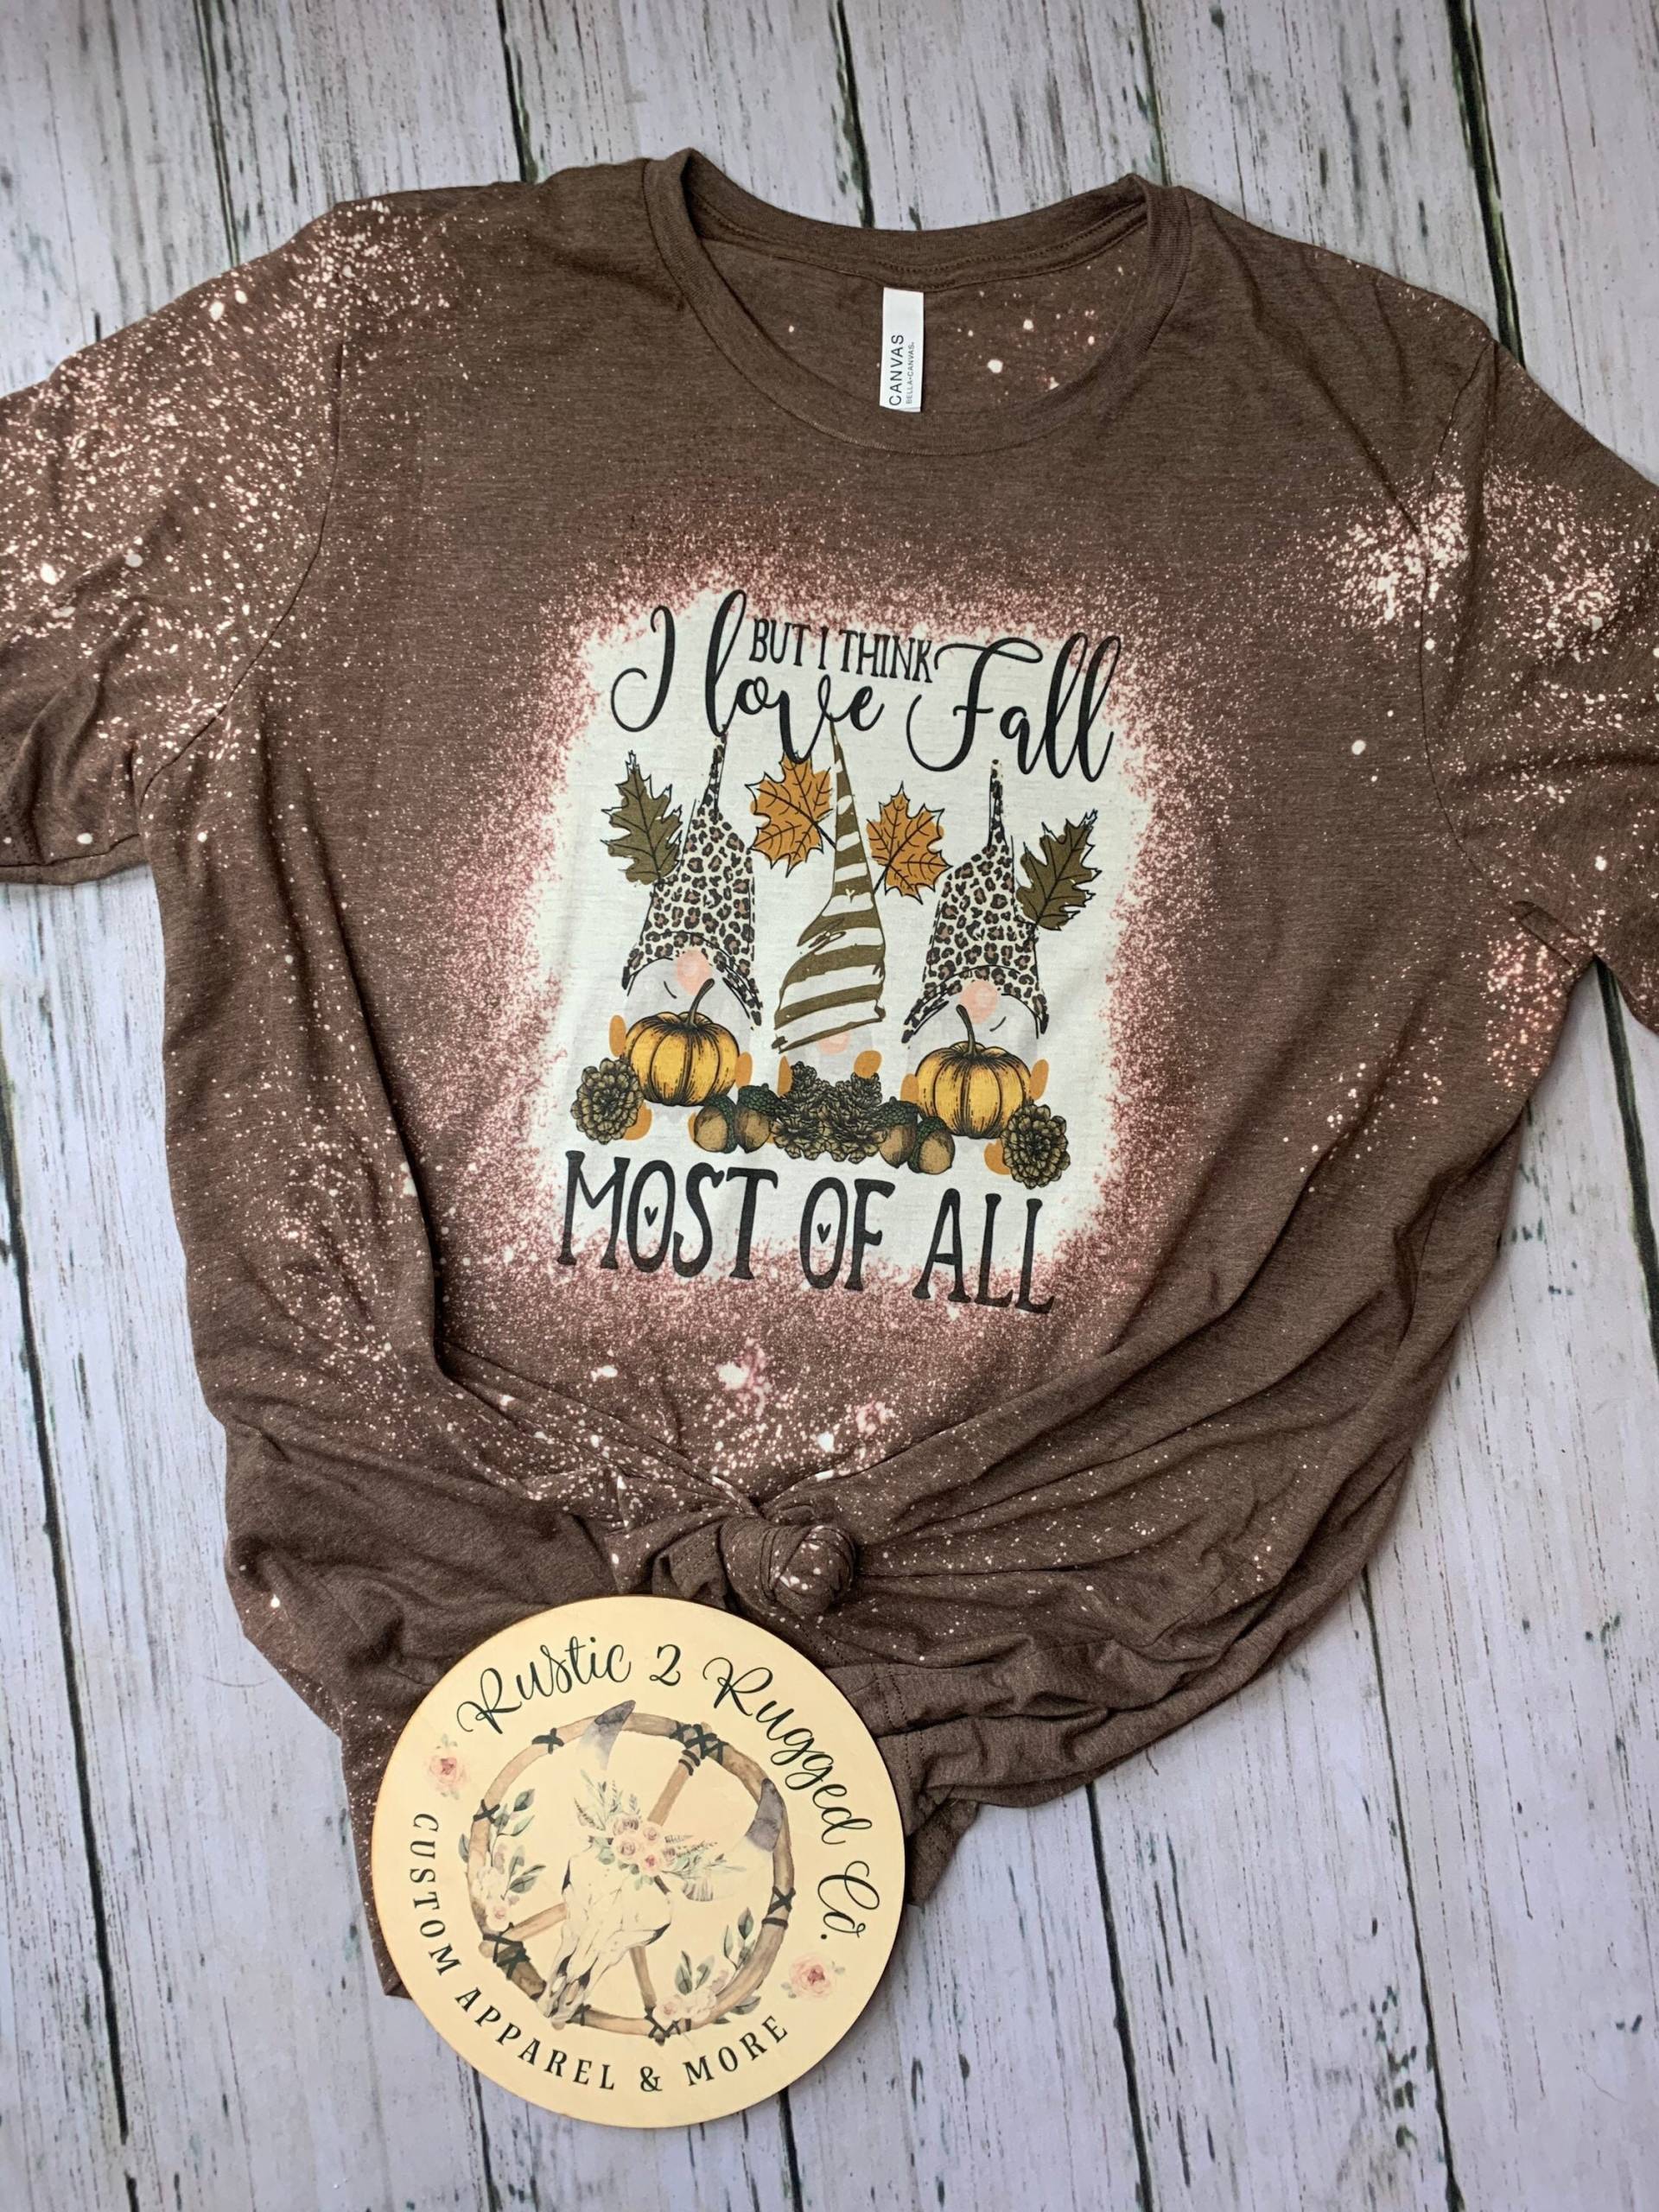 Gnome But I Think Love Fall Most Of All Gebleichtes T-Shirt von Rustic2RuggedCo